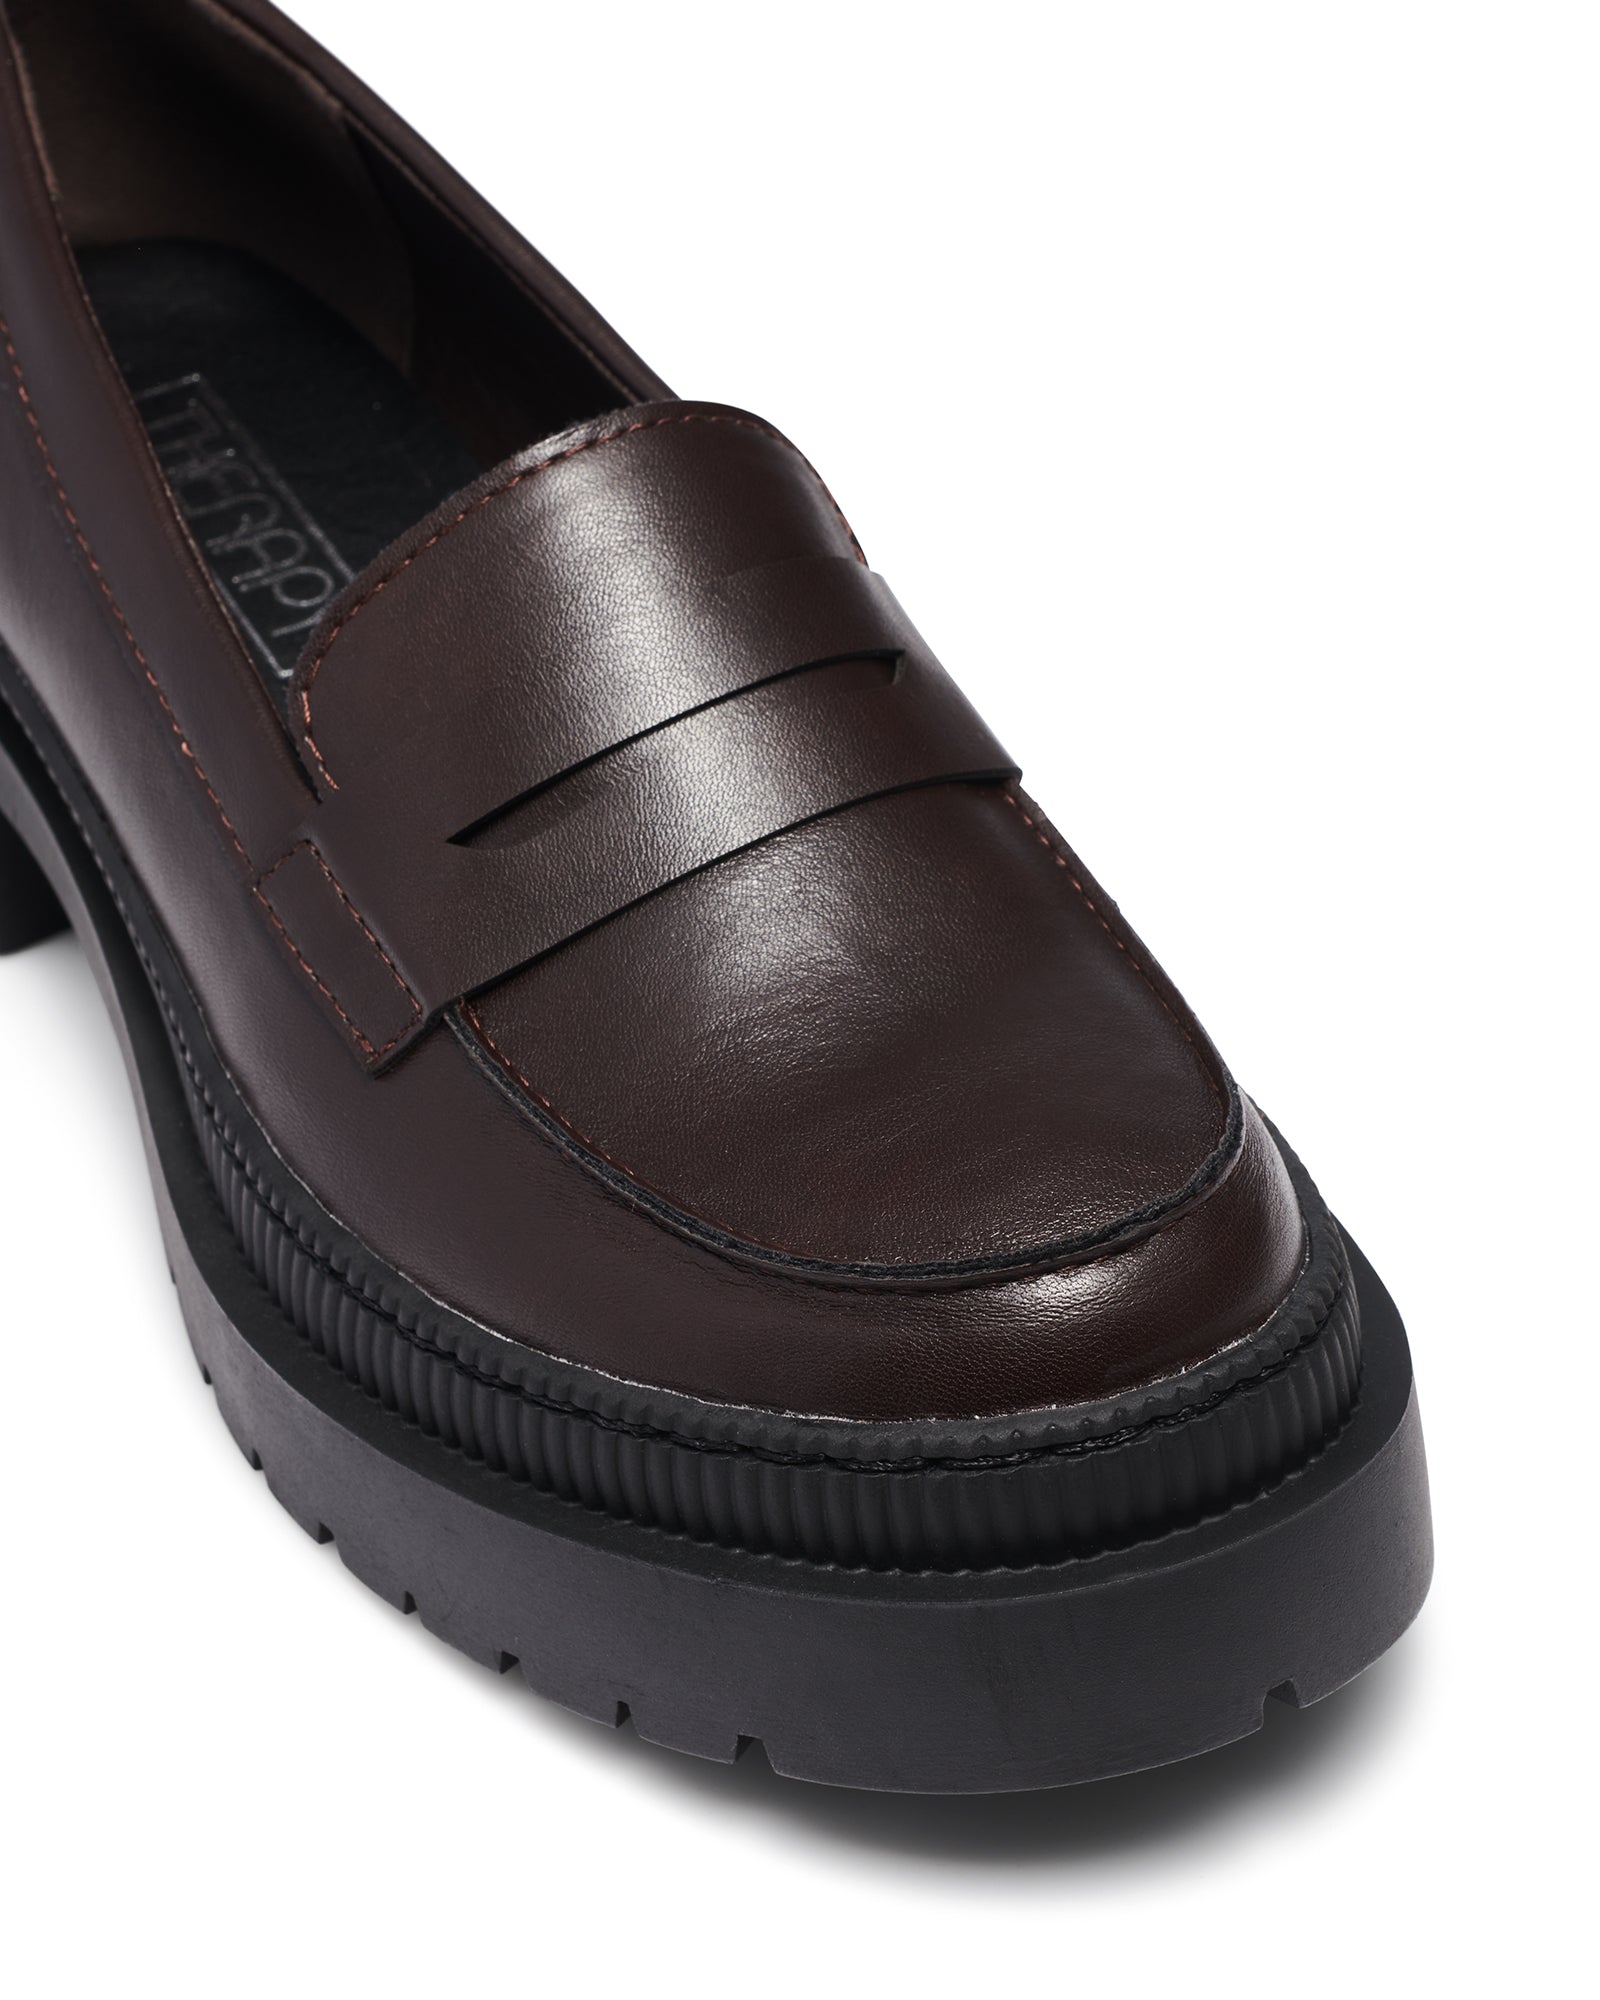 Therapy Shoes Rico Chocolate | Women's Loafers | Flats | Platform | Chunky